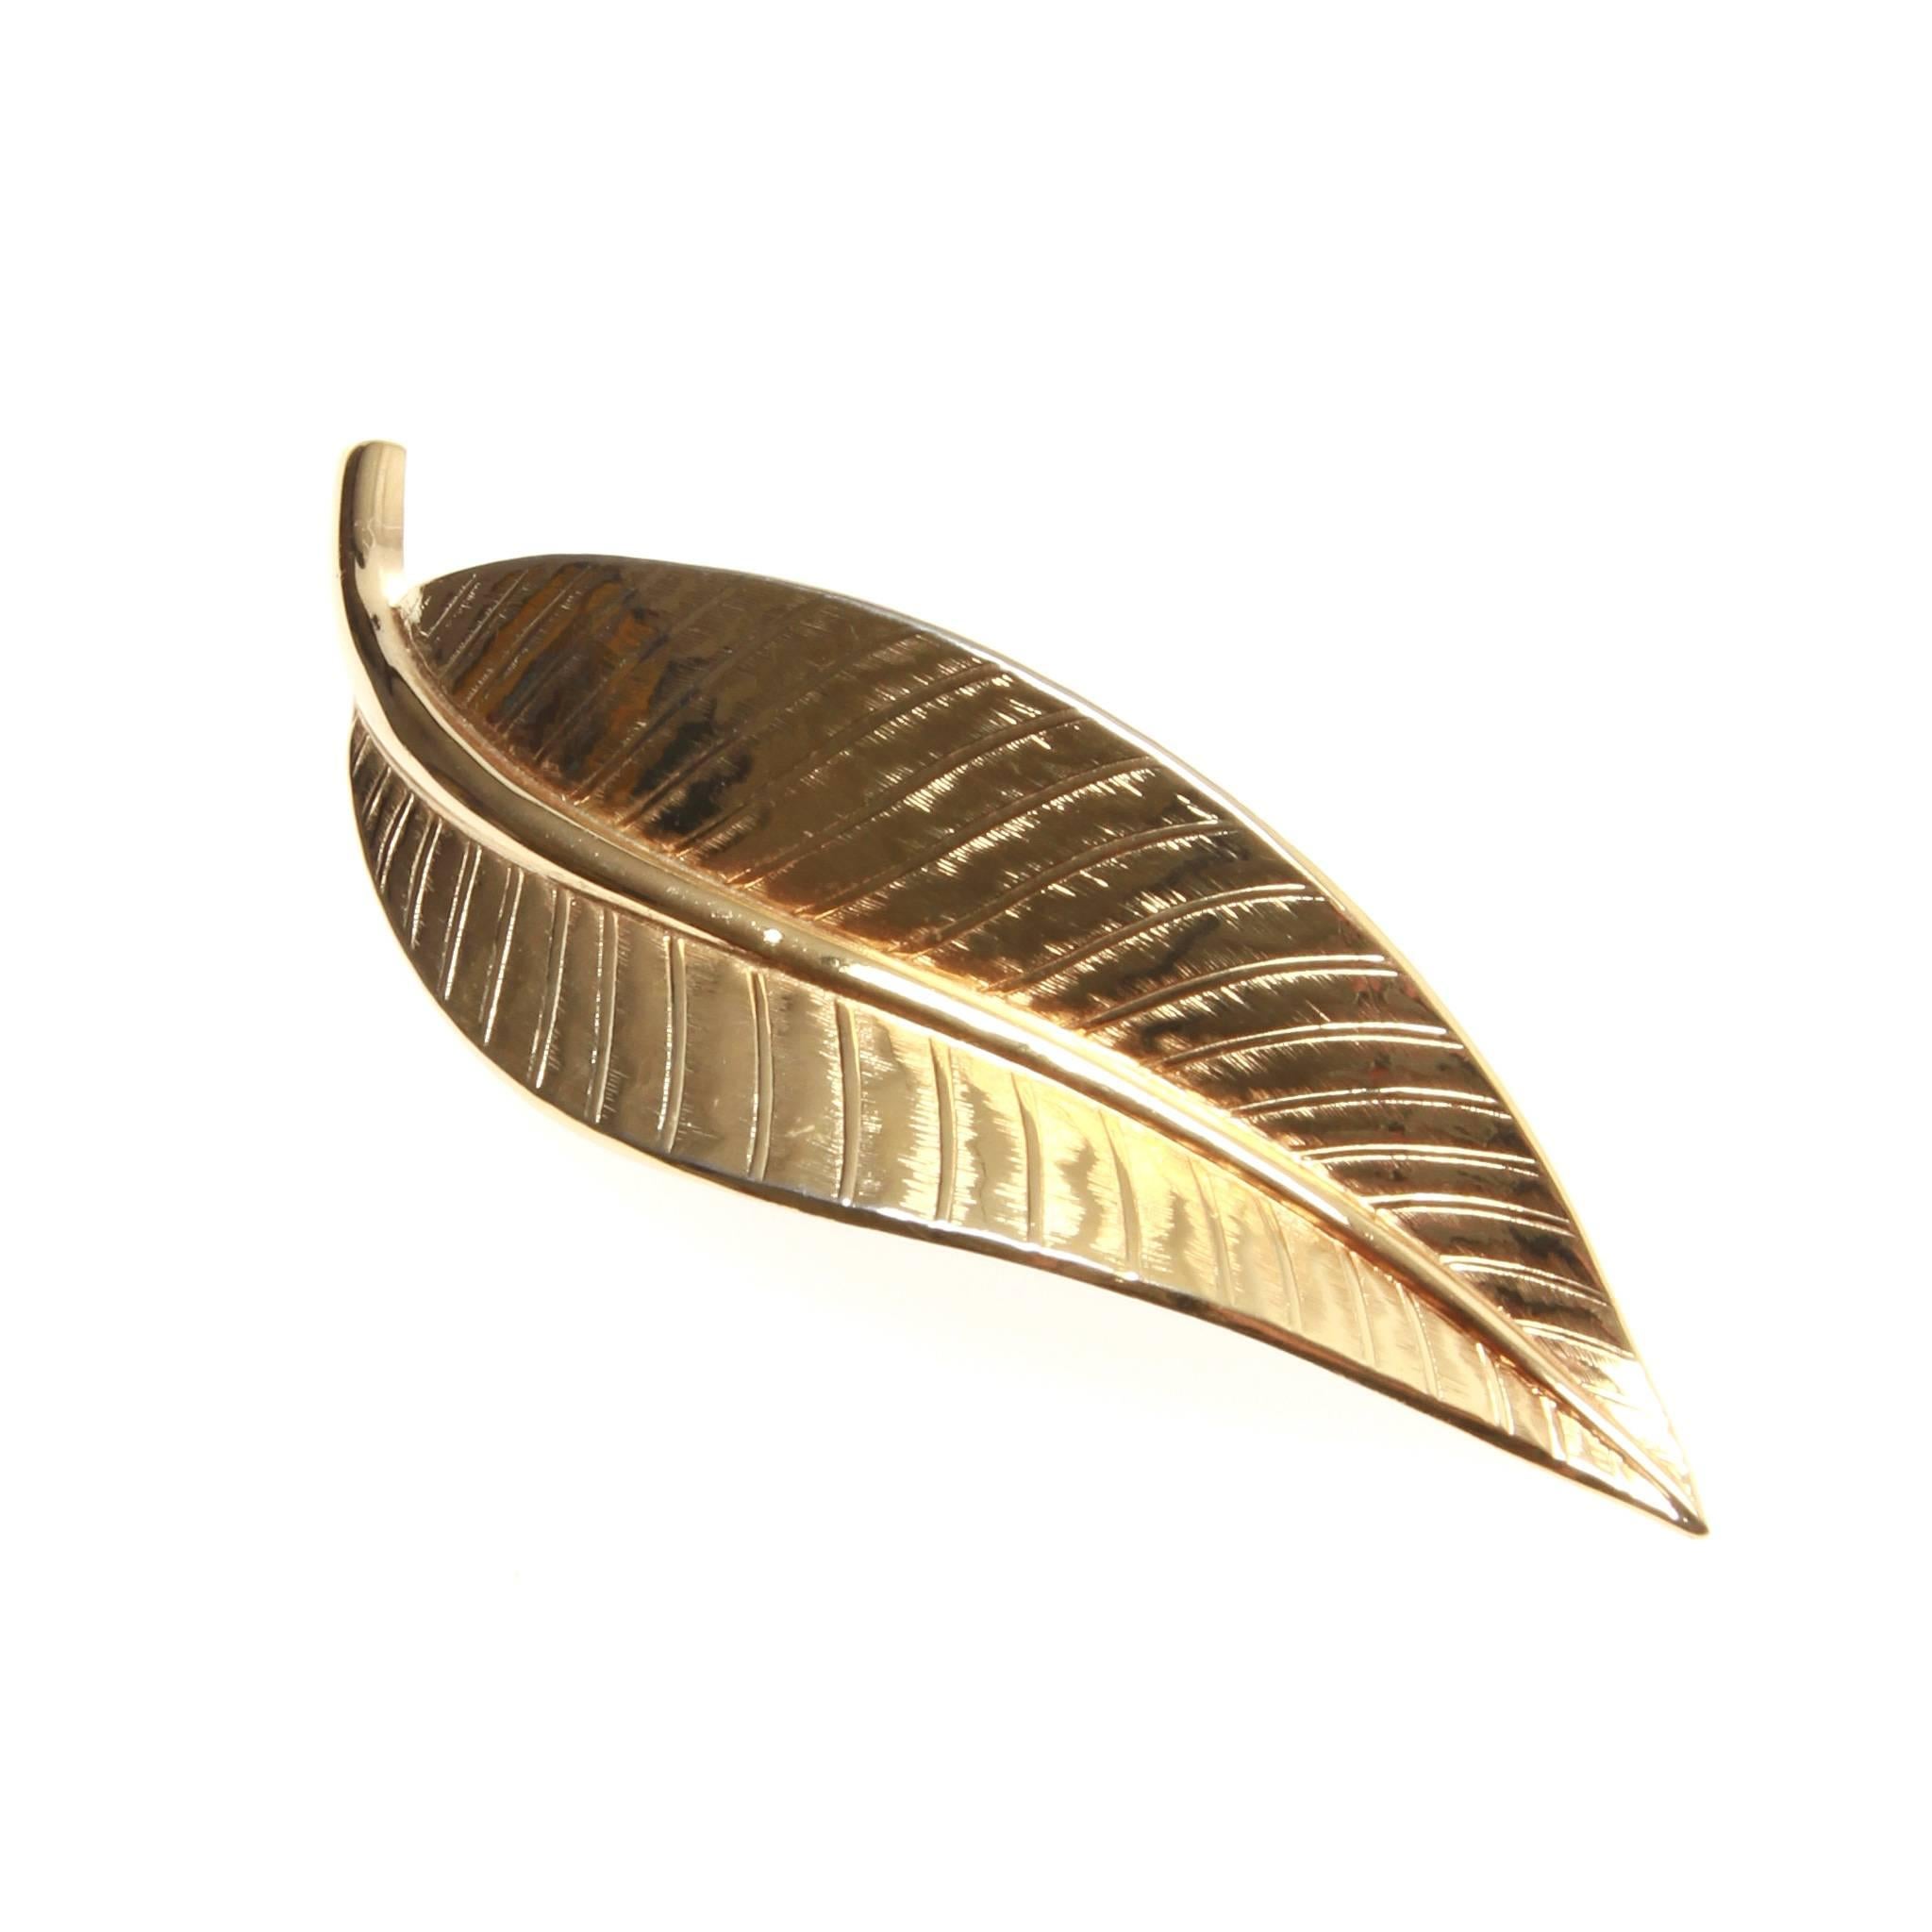 An elegant, vintage Christian Dior gold-tone patterned leaf brooch.

Roll needle closure. Made in Germany. 

